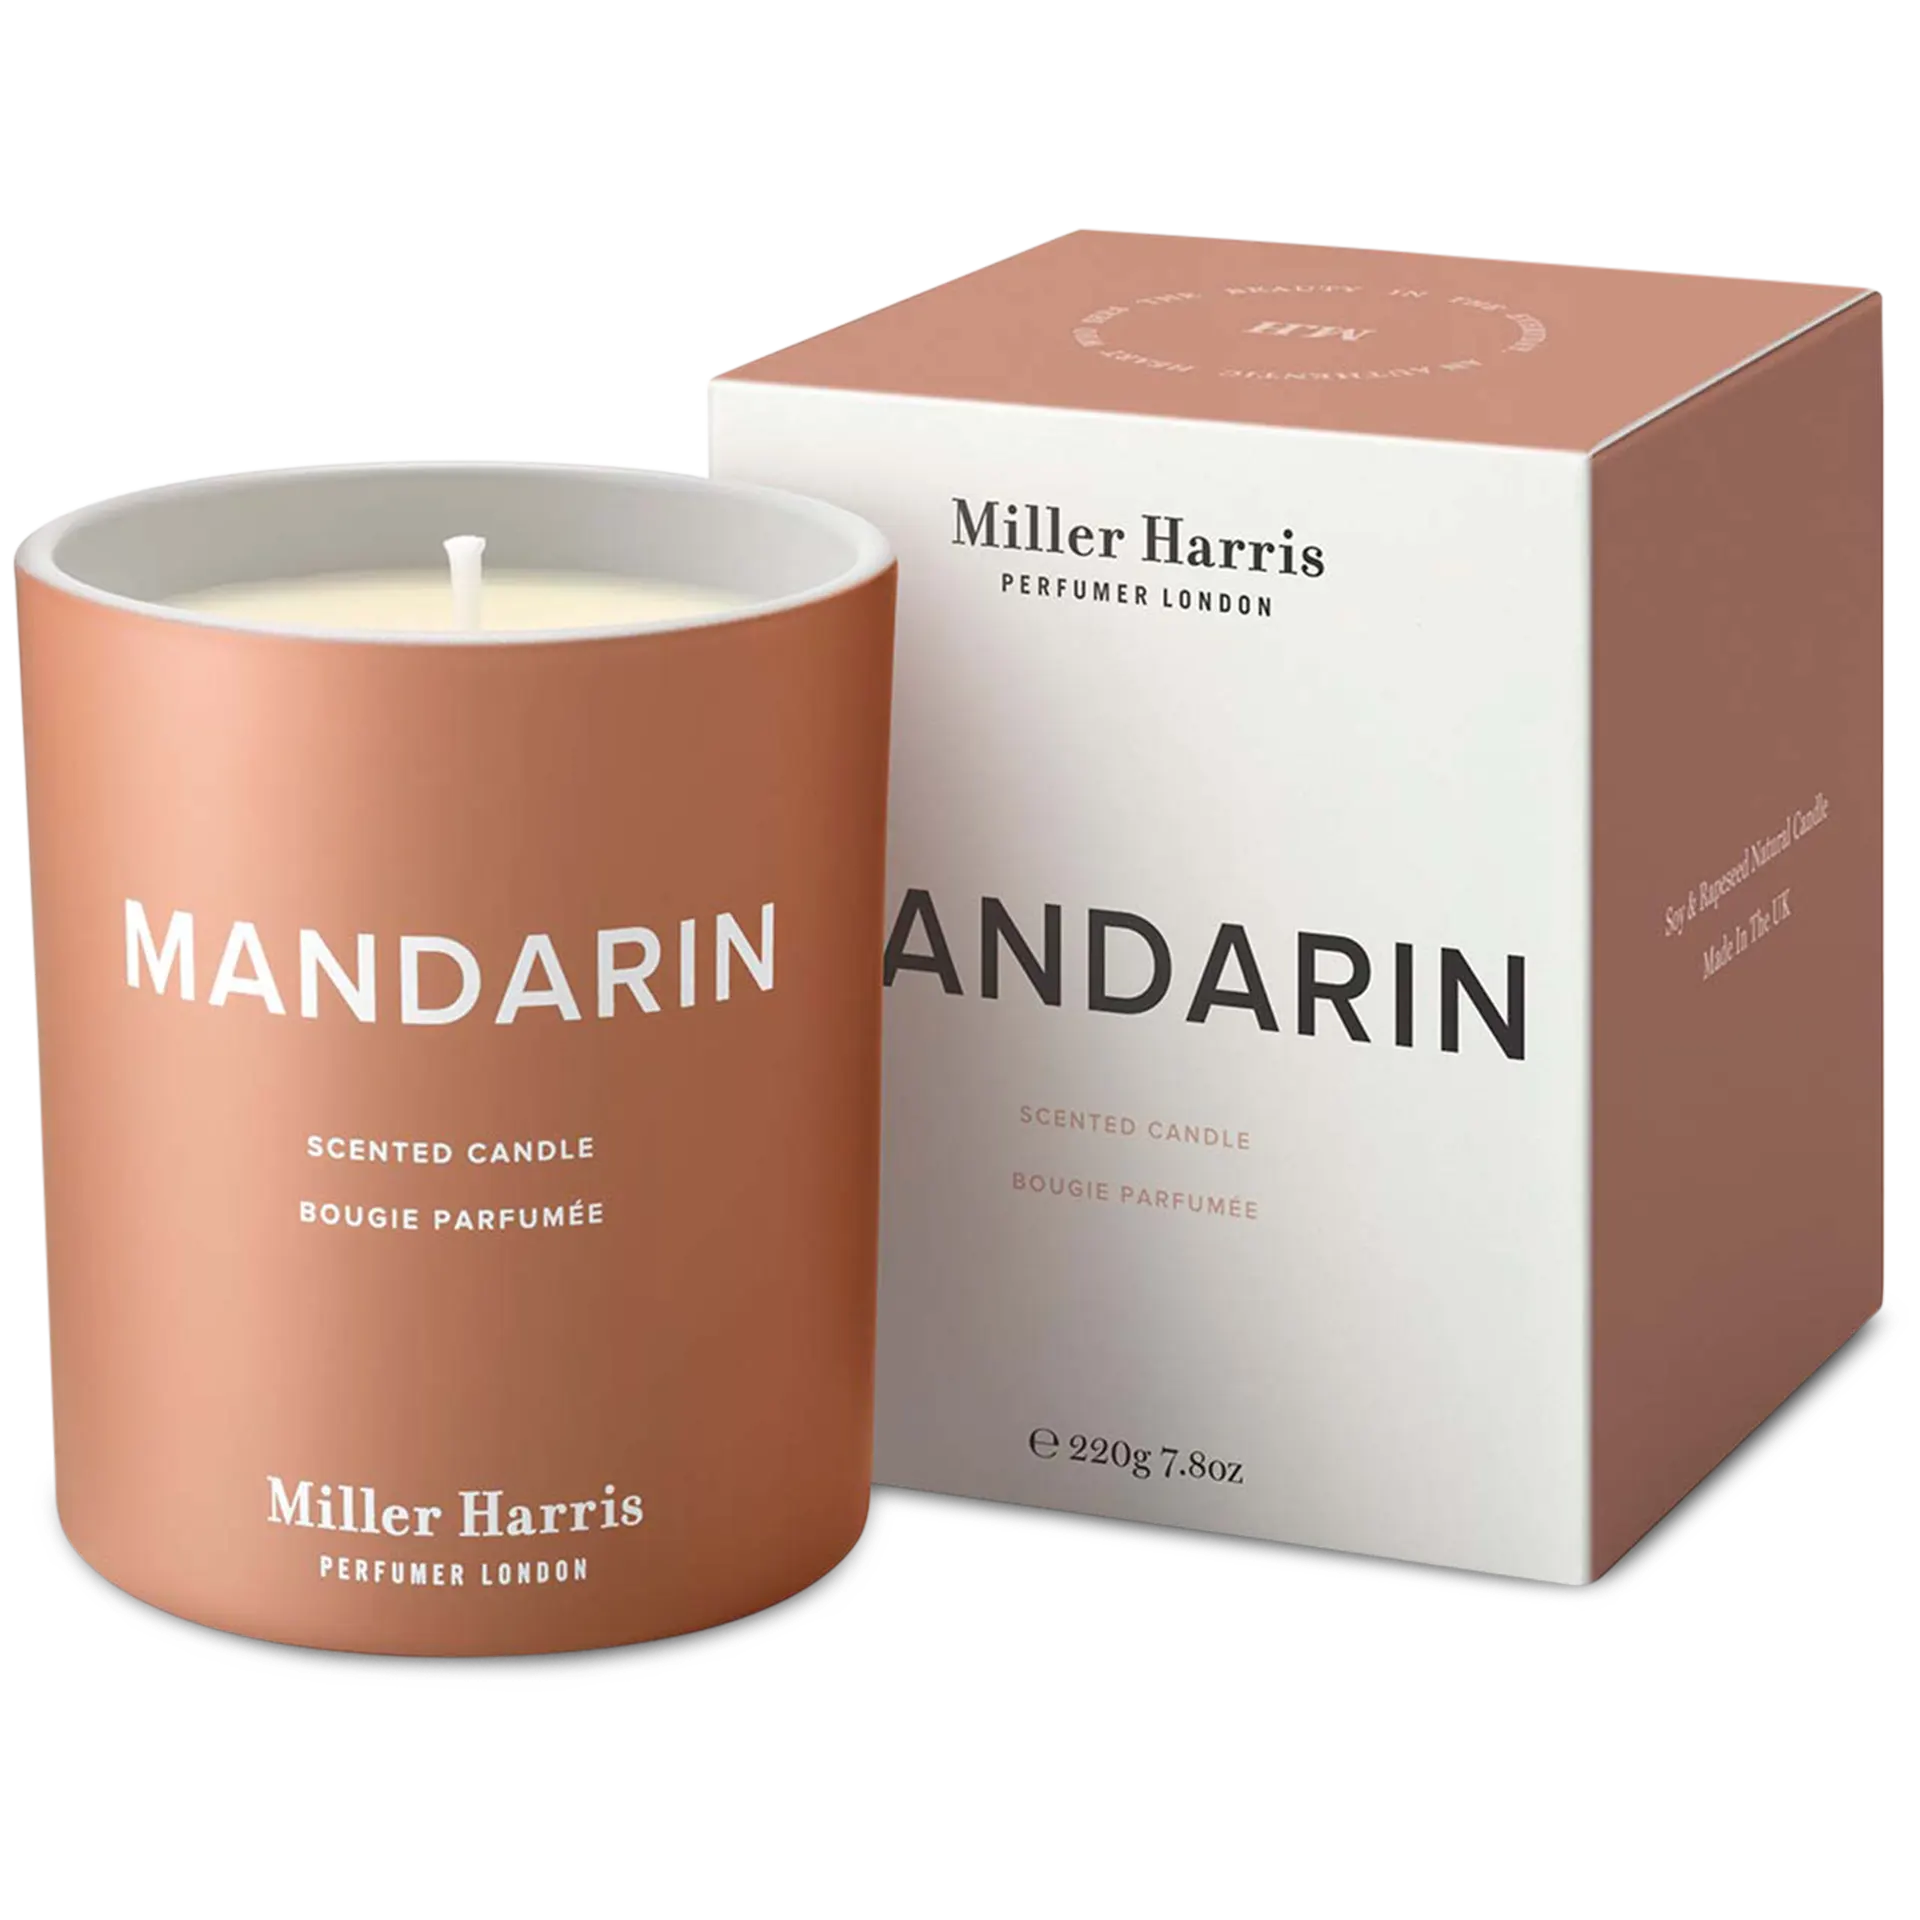 Mandarin Scented Candle 220g